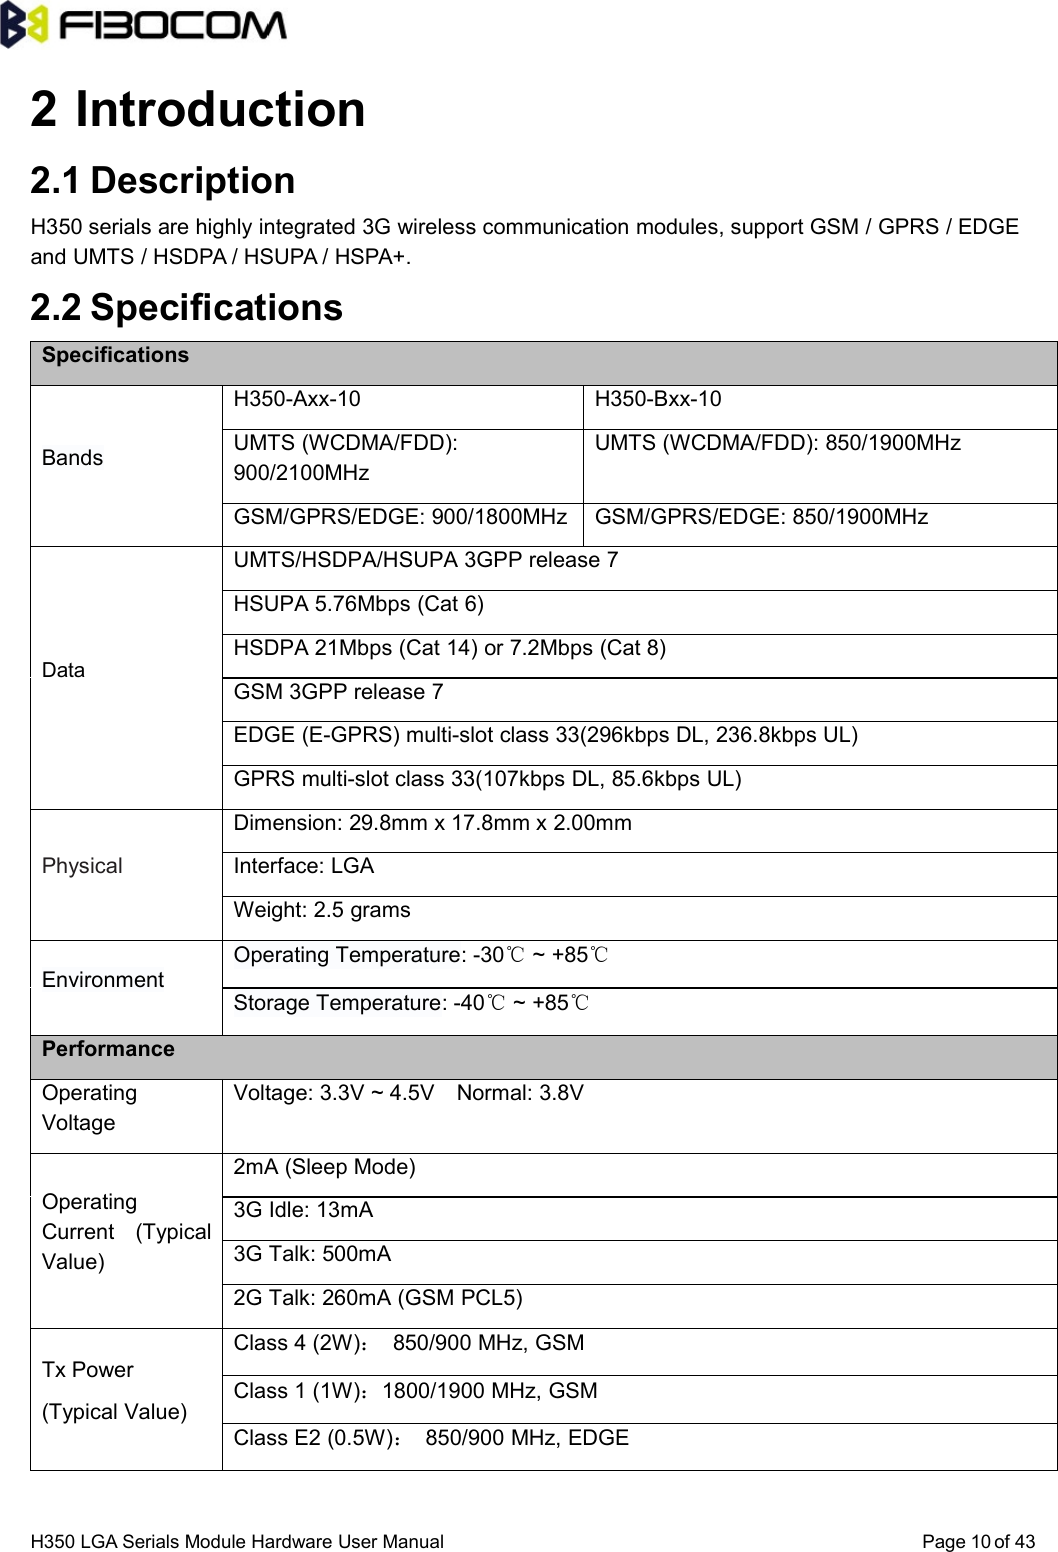 H350 LGA Serials Module Hardware User Manual Page of 43102 Introduction2.1 DescriptionH350 serials are highly integrated 3G wireless communication modules, support GSM / GPRS / EDGEand UMTS / HSDPA / HSUPA / HSPA+.2.2 SpecificationsSpecificationsBandsH350-Axx-10 H350-Bxx-10UMTS (WCDMA/FDD):900/2100MHzUMTS (WCDMA/FDD): 850/1900MHzGSM/GPRS/EDGE: 900/1800MHz GSM/GPRS/EDGE: 850/1900MHzDataUMTS/HSDPA/HSUPA 3GPP release 7HSUPA 5.76Mbps (Cat 6)HSDPA 21Mbps (Cat 14) or 7.2Mbps (Cat 8)GSM 3GPP release 7EDGE (E-GPRS) multi-slot class 33(296kbps DL, 236.8kbps UL)GPRS multi-slot class 33(107kbps DL, 85.6kbps UL)PhysicalDimension: 29.8mm x 17.8mm x 2.00mmInterface: LGAWeight: 2.5 gramsEnvironmentOperating Temperature: -30℃~ +85℃Storage Temperature: -40℃~ +85℃PerformanceOperatingVoltageVoltage: 3.3V ~ 4.5V Normal: 3.8VOperatingCurrent (TypicalValue)2mA (Sleep Mode)3G Idle: 13mA3G Talk: 500mA2G Talk: 260mA (GSM PCL5)Tx Power(Typical Value)Class 4 (2W)：850/900 MHz, GSMClass 1 (1W)：1800/1900 MHz, GSMClass E2 (0.5W)：850/900 MHz, EDGE